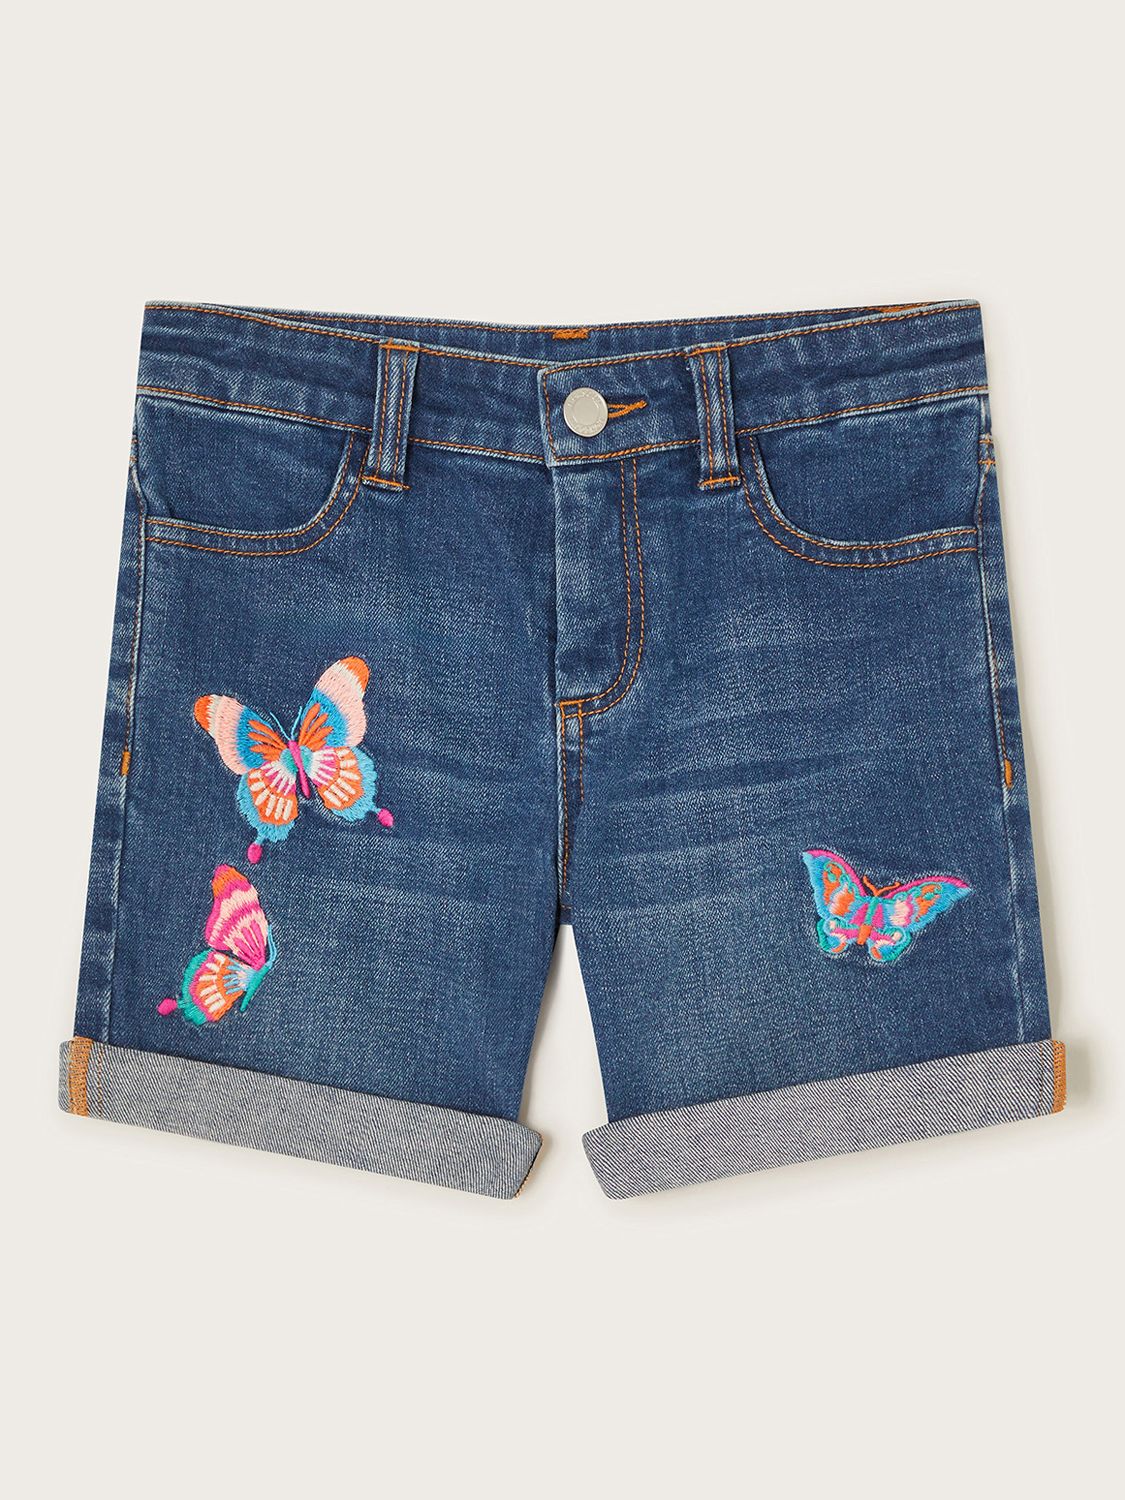 Monsoon Kids' Butterfly Embroidered Denim Shorts, Blue/Multi, 14-15 years